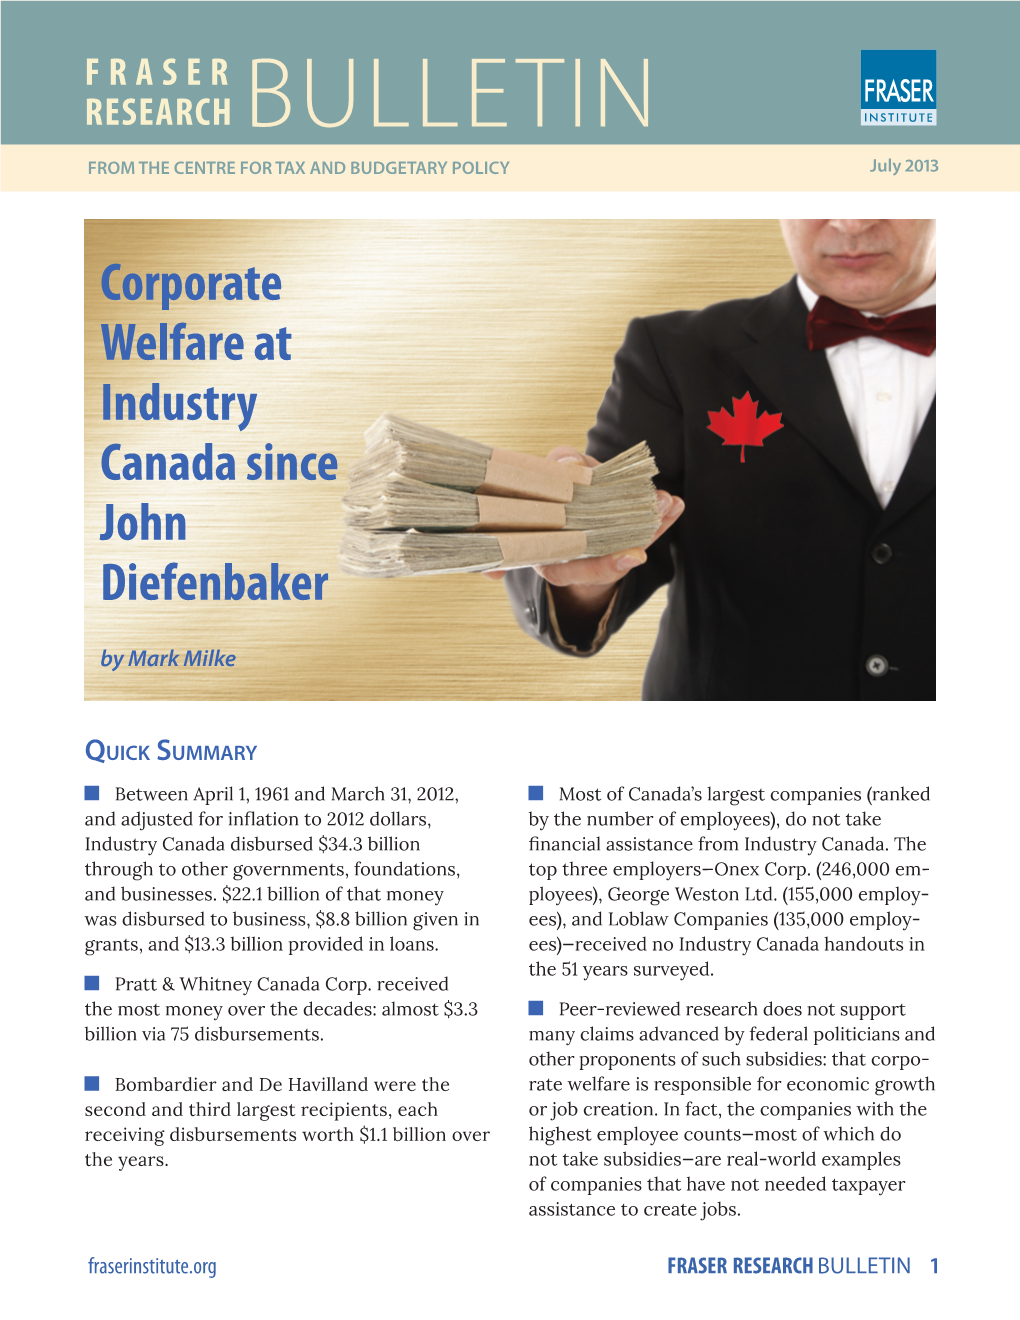 Corporate Welfare at Industry Canada Since John Diefenbaker